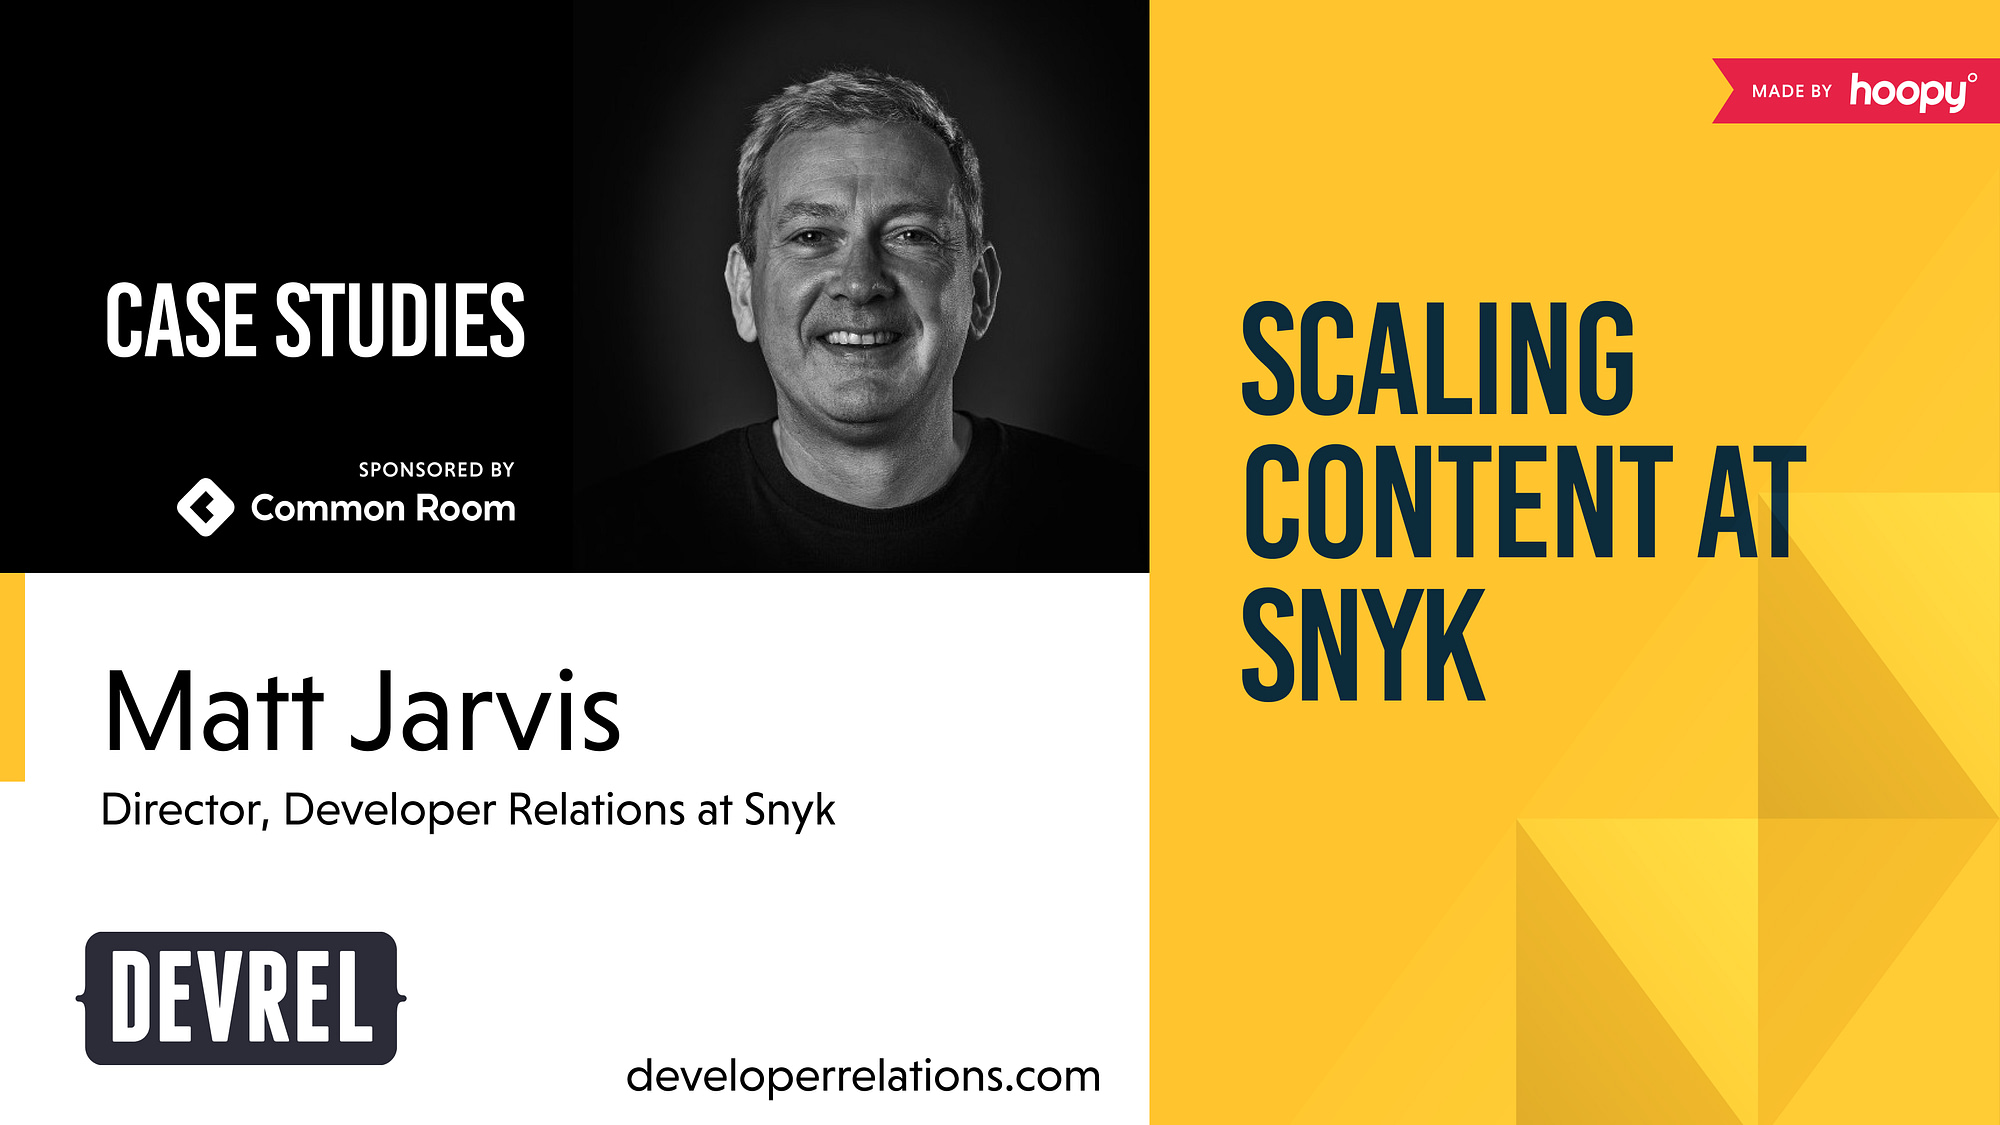 Scaling content at Snyk: a case study